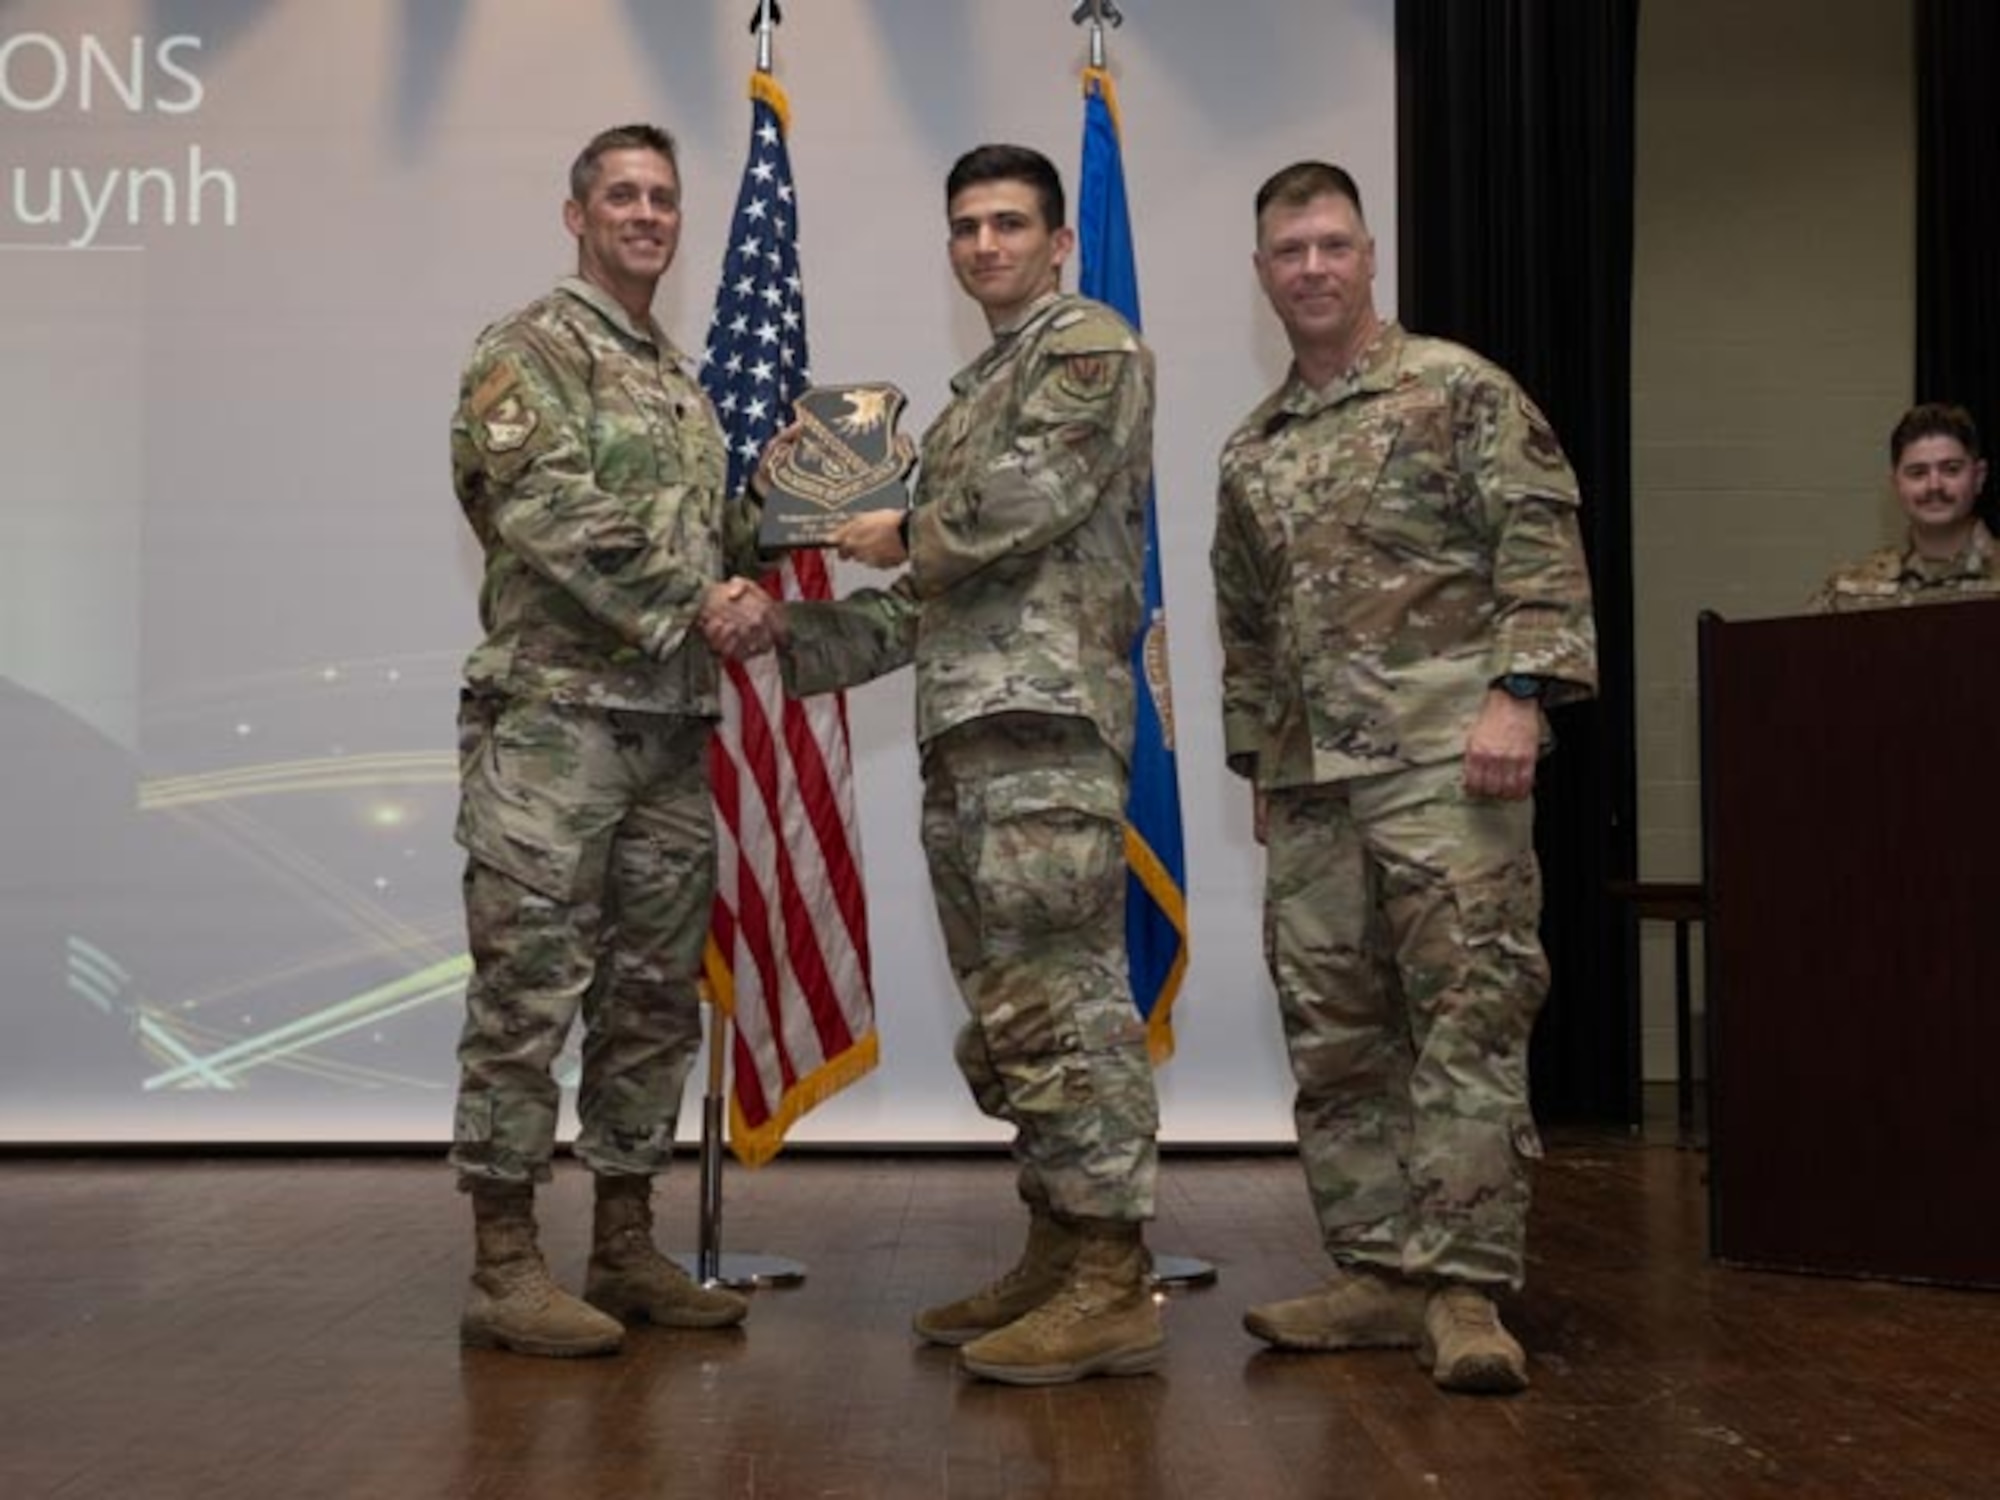 U.S. Air Force Lt. Col. James Melvin, left, Mission Support Group deputy commander, and Chief Master Sgt. Edward Mueller, right, Mission Support Group senior enlisted leader, 1st Lt. Franco Chiappori, center, who accepts the award on behalf of Senior Airman Cuong Huynh, contracting specialist,  Volunteer of the First Quarter Award at Seymour Johnson Air Force Base, North Carolina, April 19, 2024. The ceremony recognized 10 individual award winners and one team for outstanding performance. (U.S. Air Force photo by Airman Megan Cusmano)